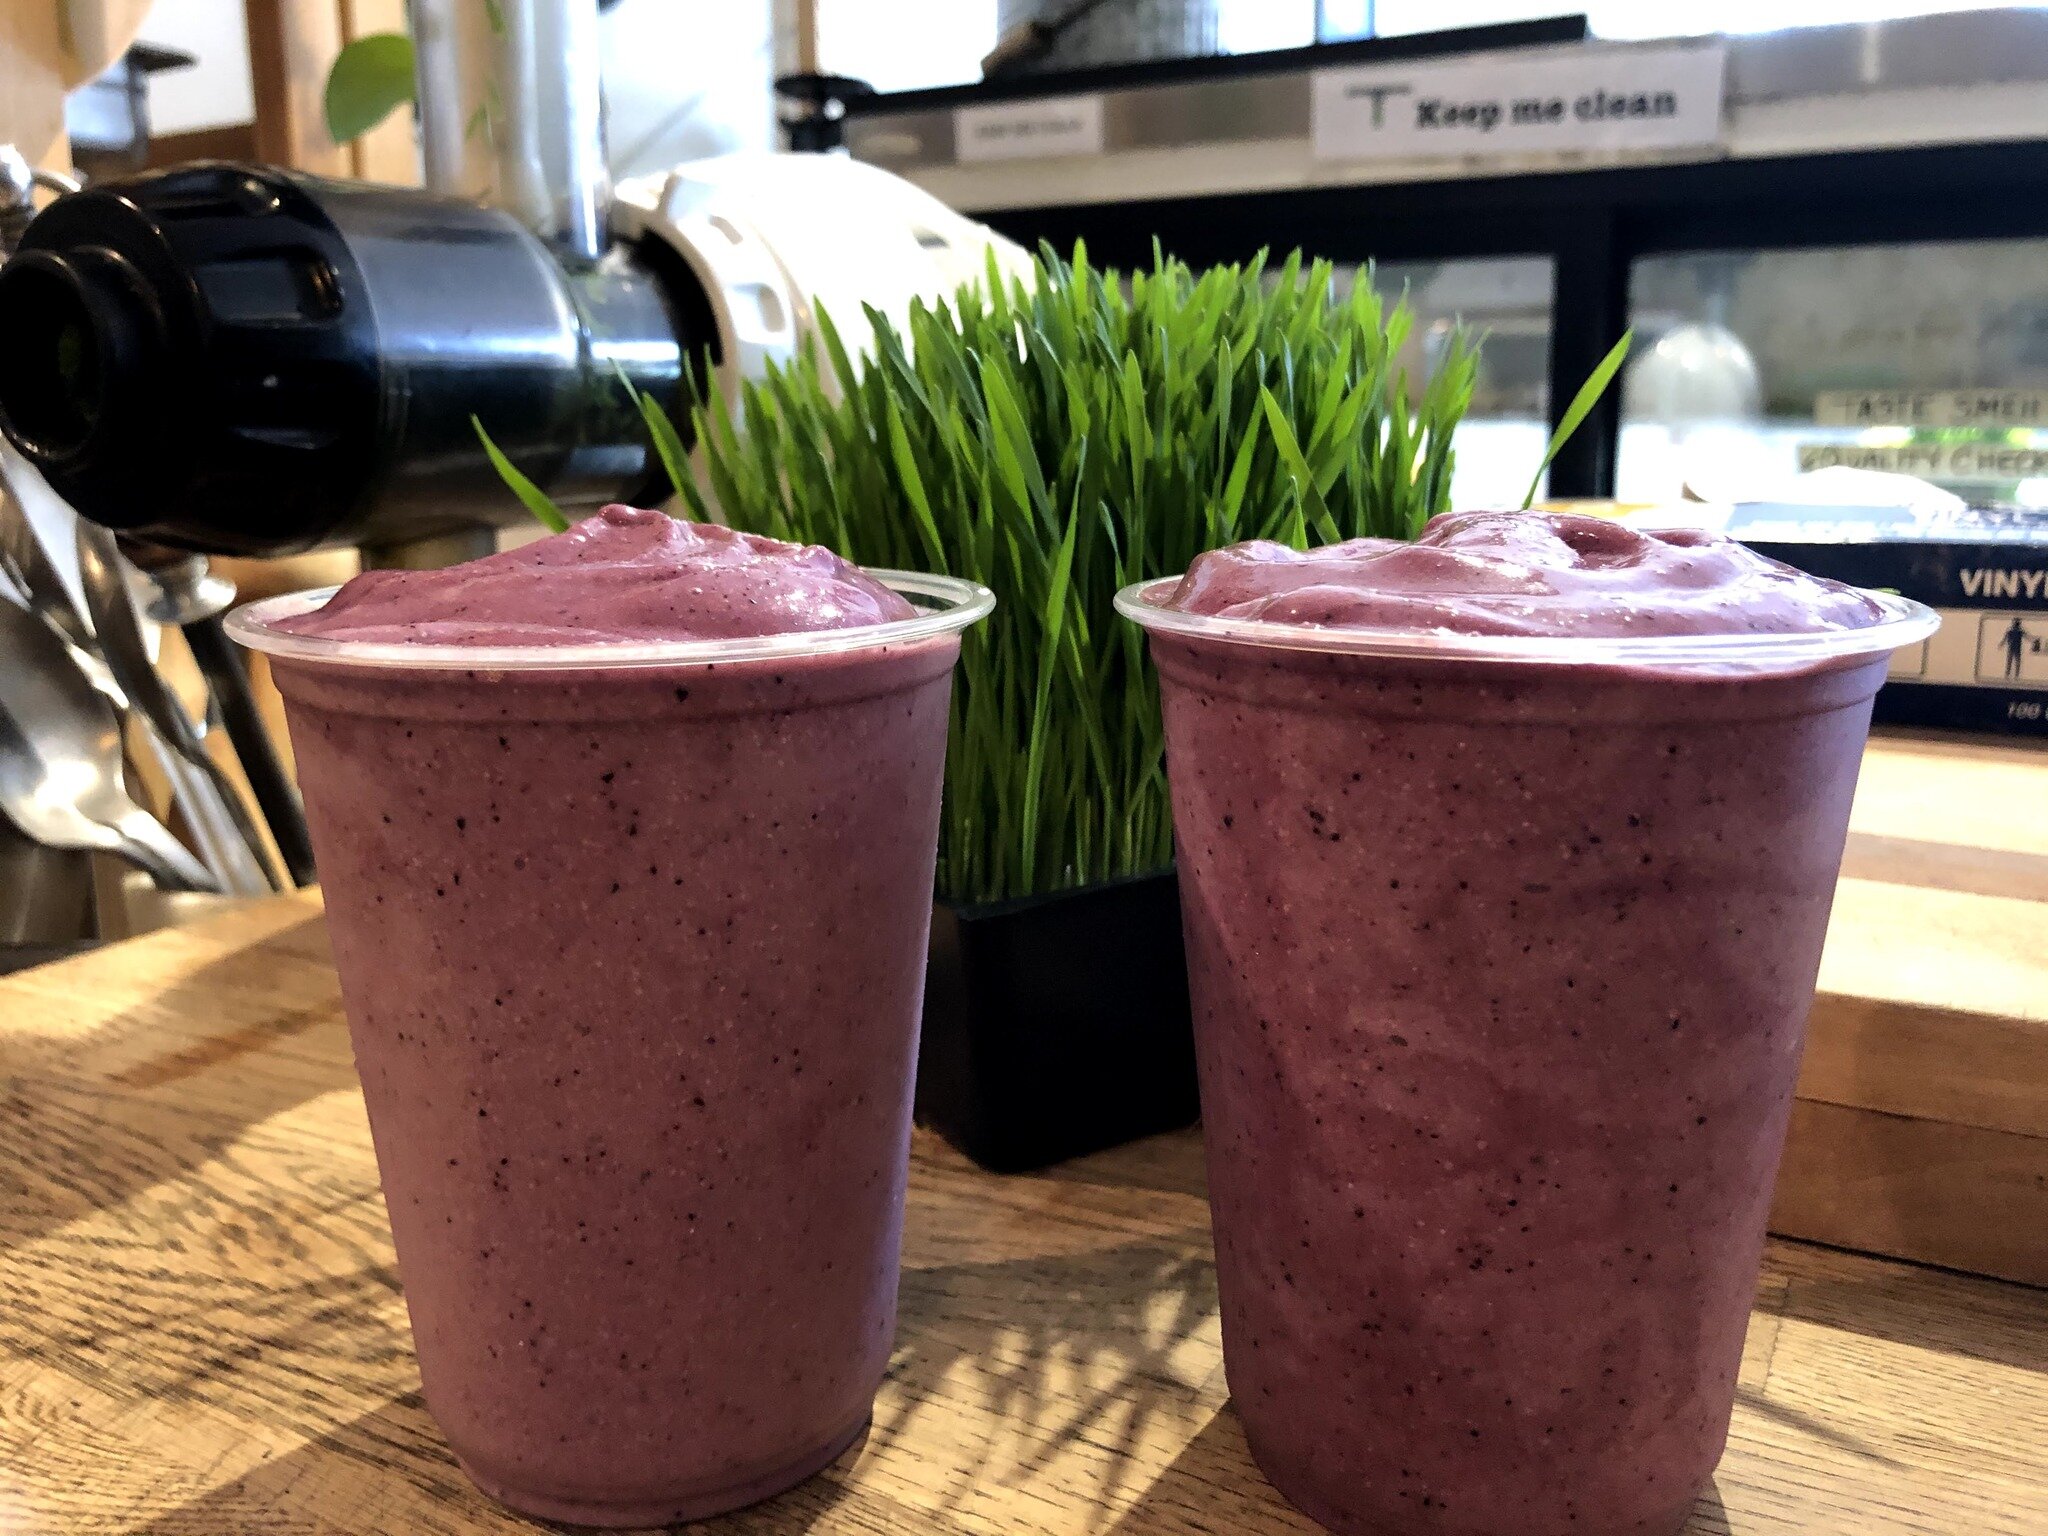 Find your healthy happy hour this weekend 🤩  Fri Sat Sunday 11-4 pm We are offerring 10% off our fresh, organic handcrafted juices, smoothies and shots. Try the delicious Blueberry Mango Basil smoothie invented by one of our creative kitchen crew me